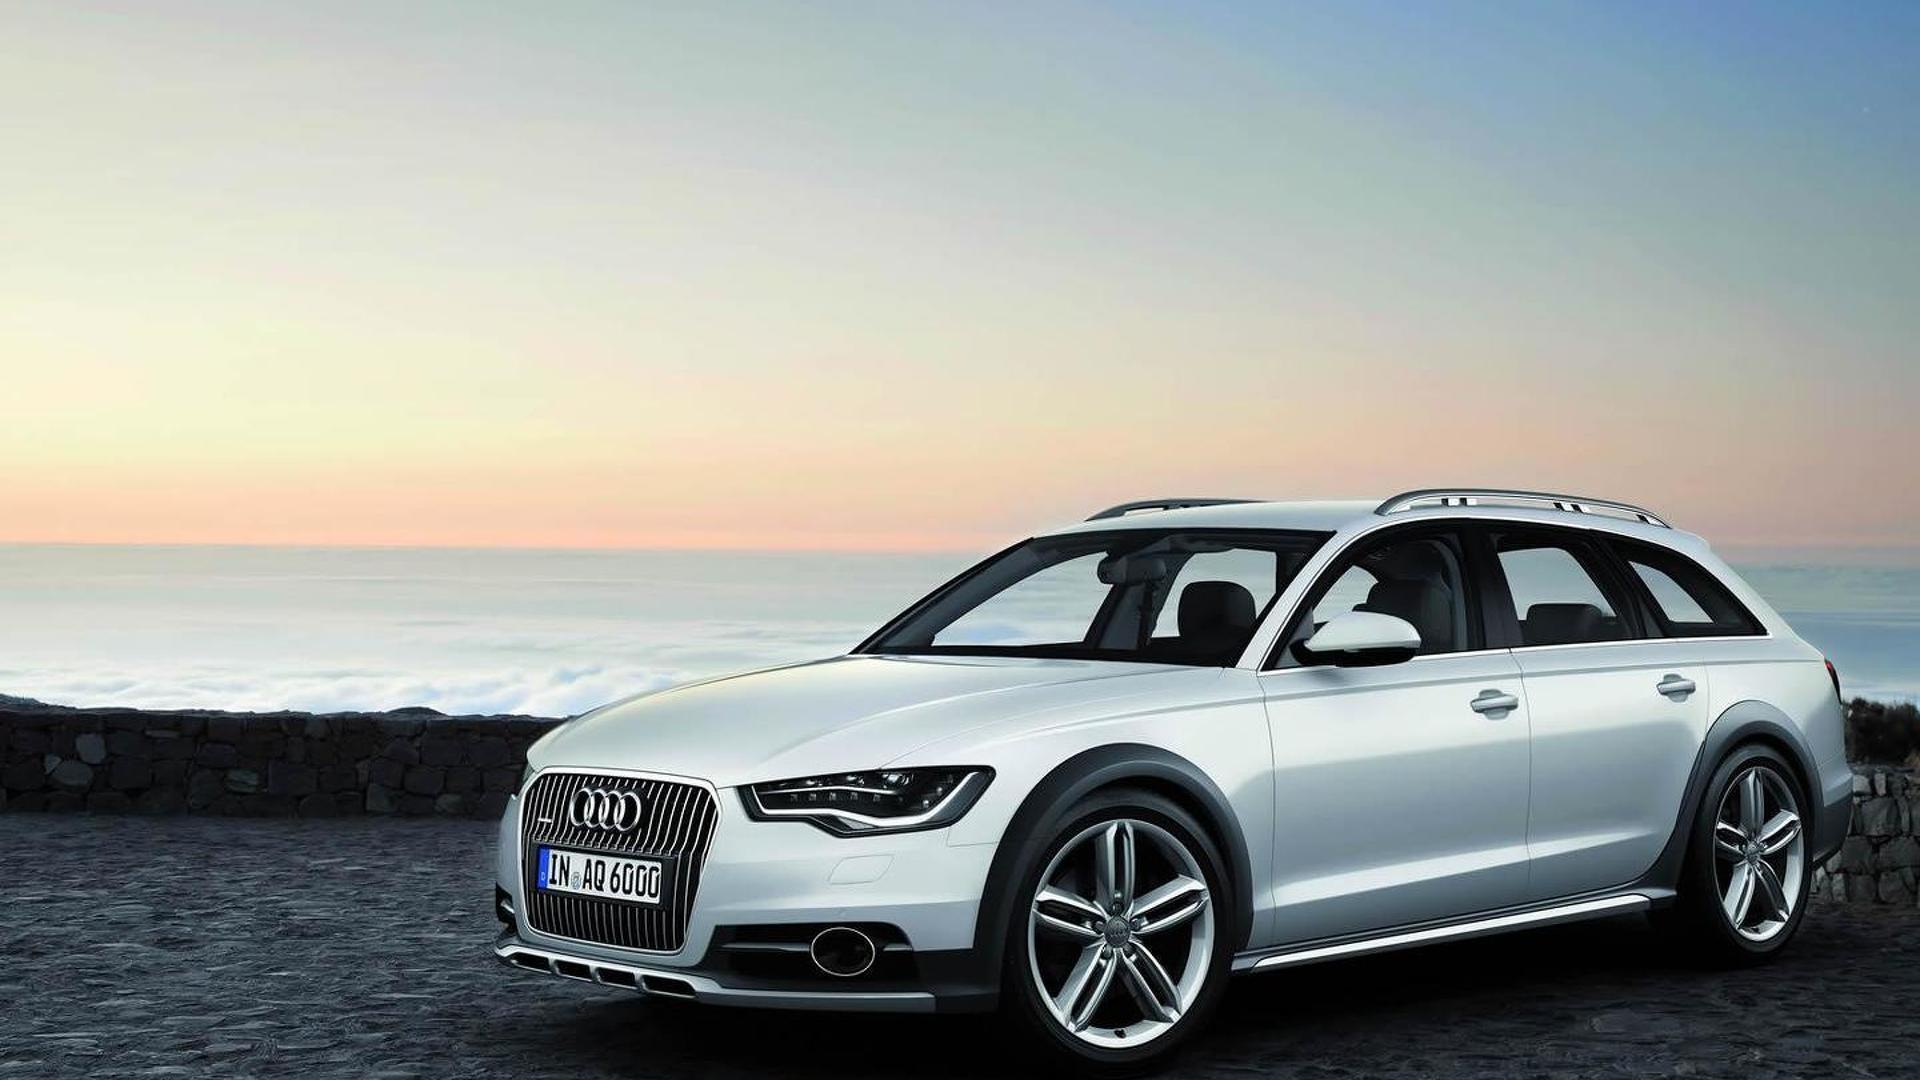 Audi A6 Allroad Hd Wallpapers For Pc